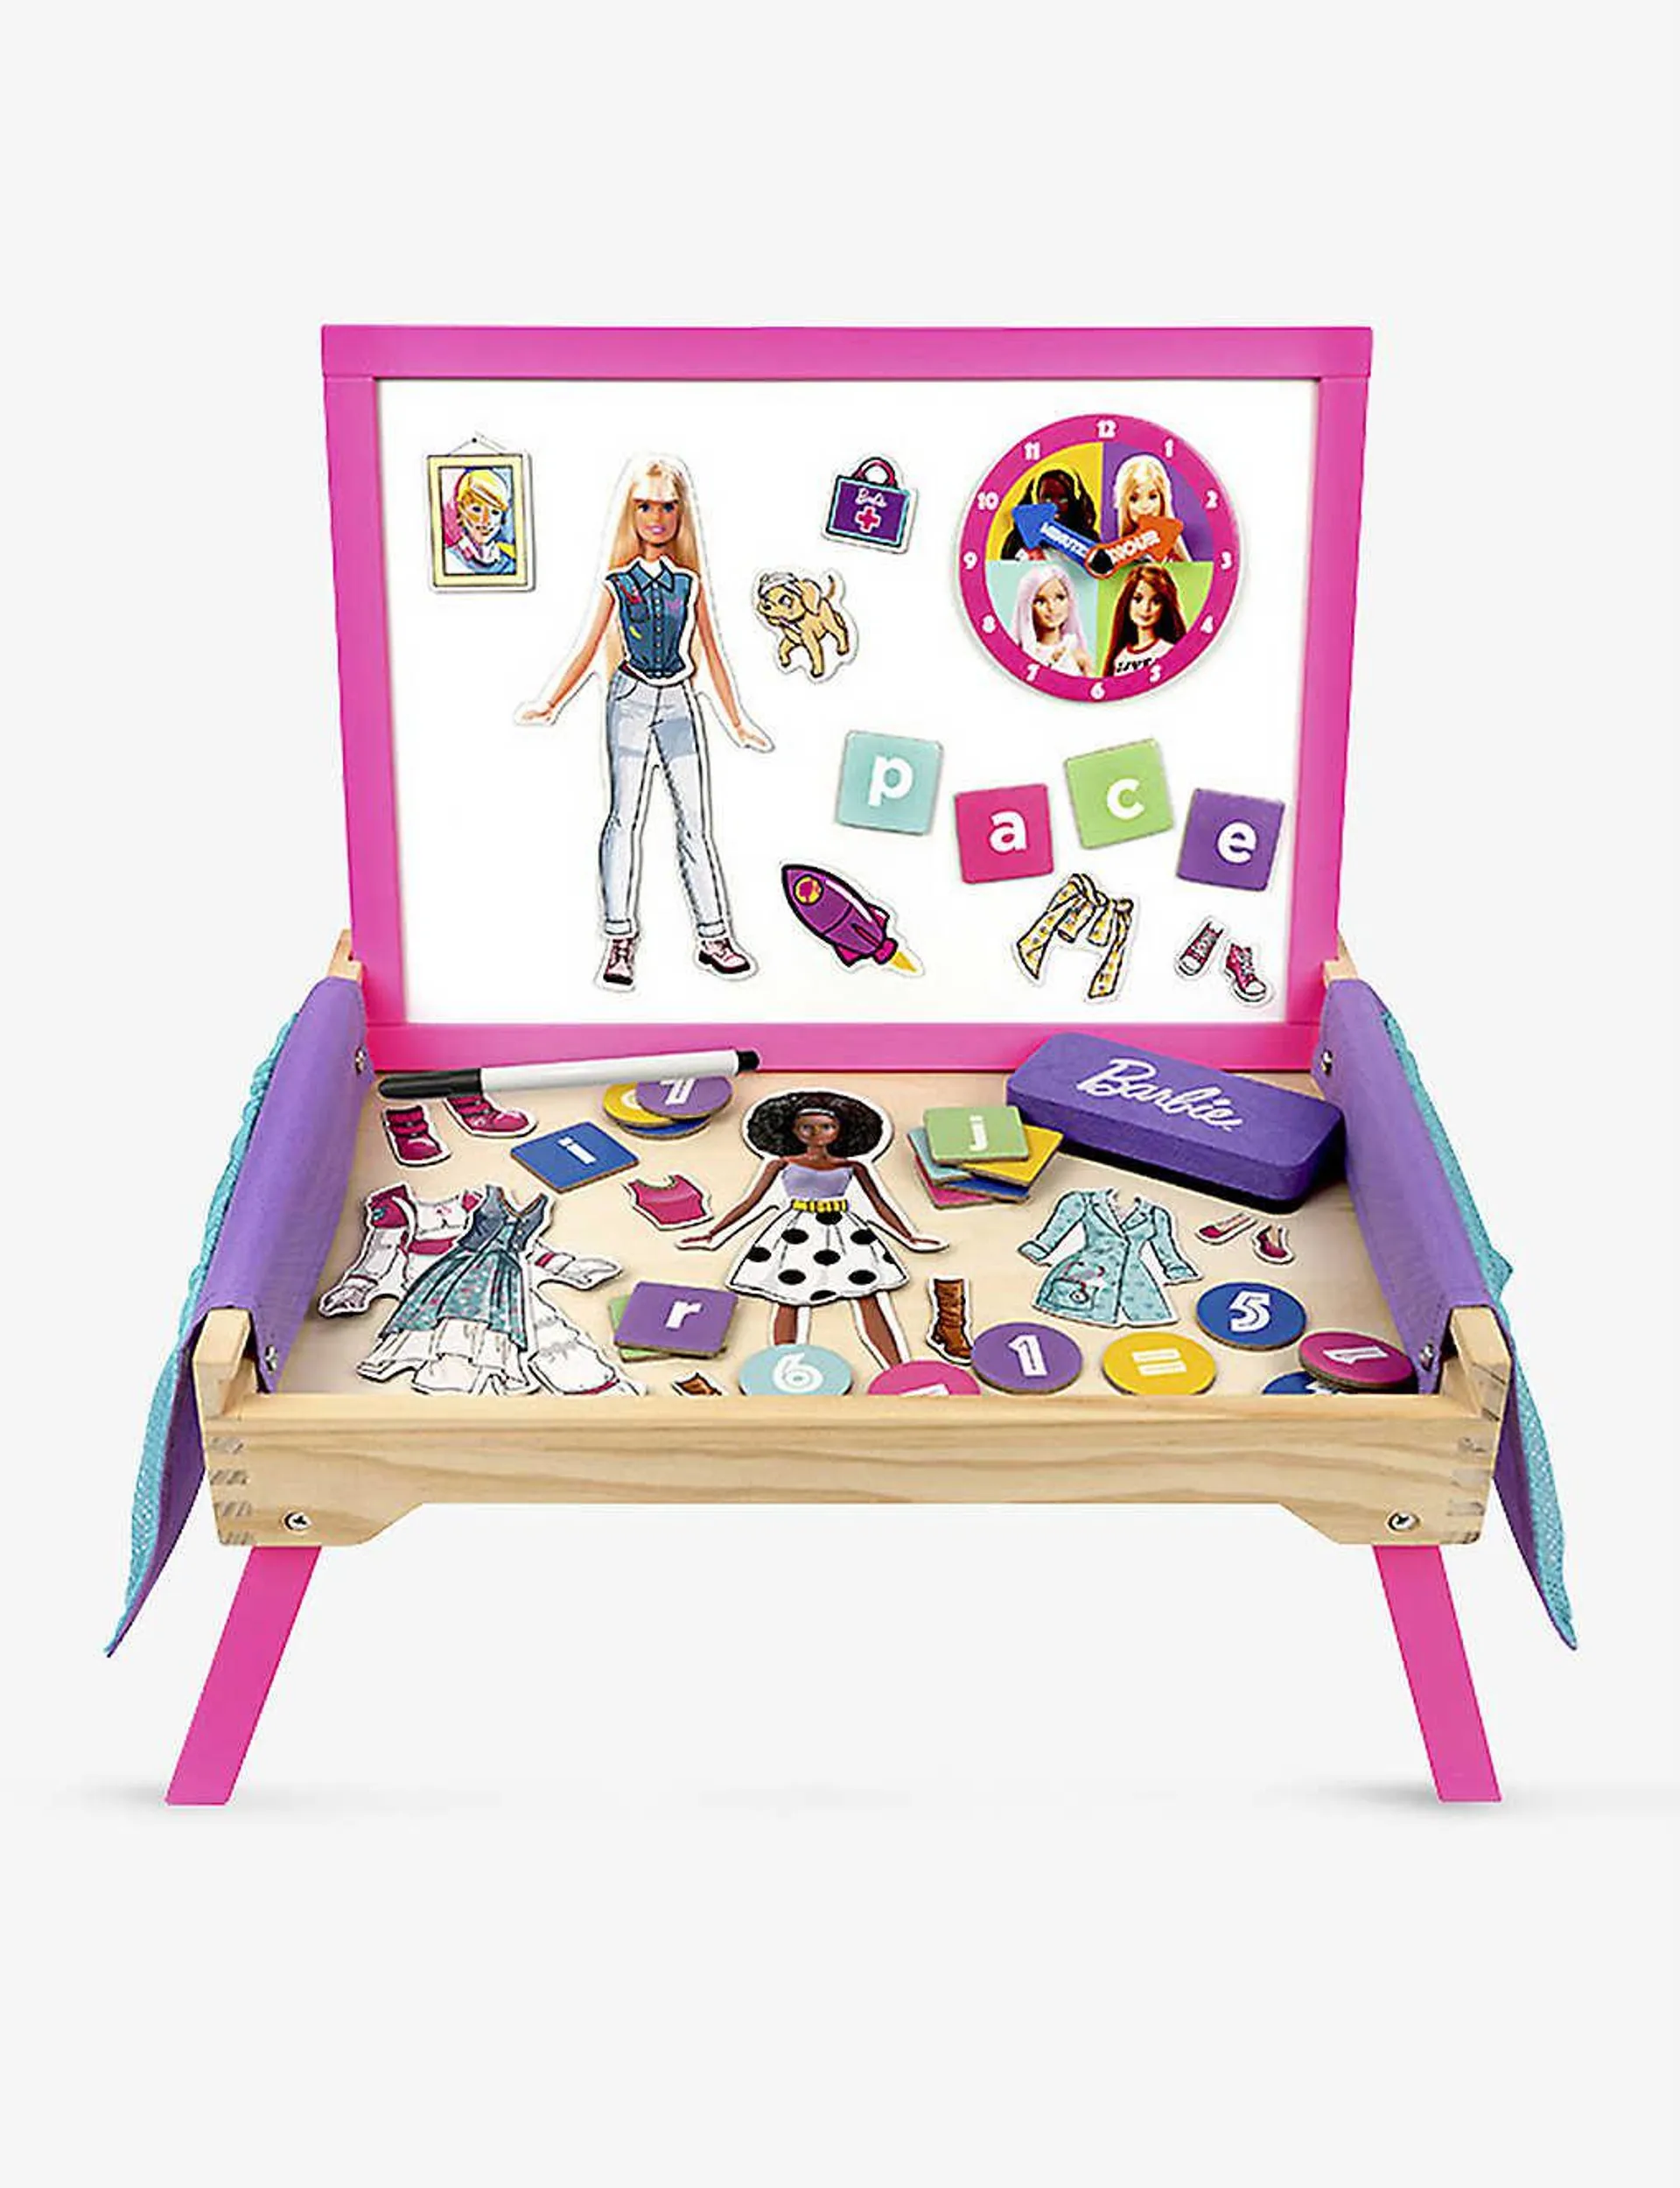 Barbie My Creation Station wooden playset